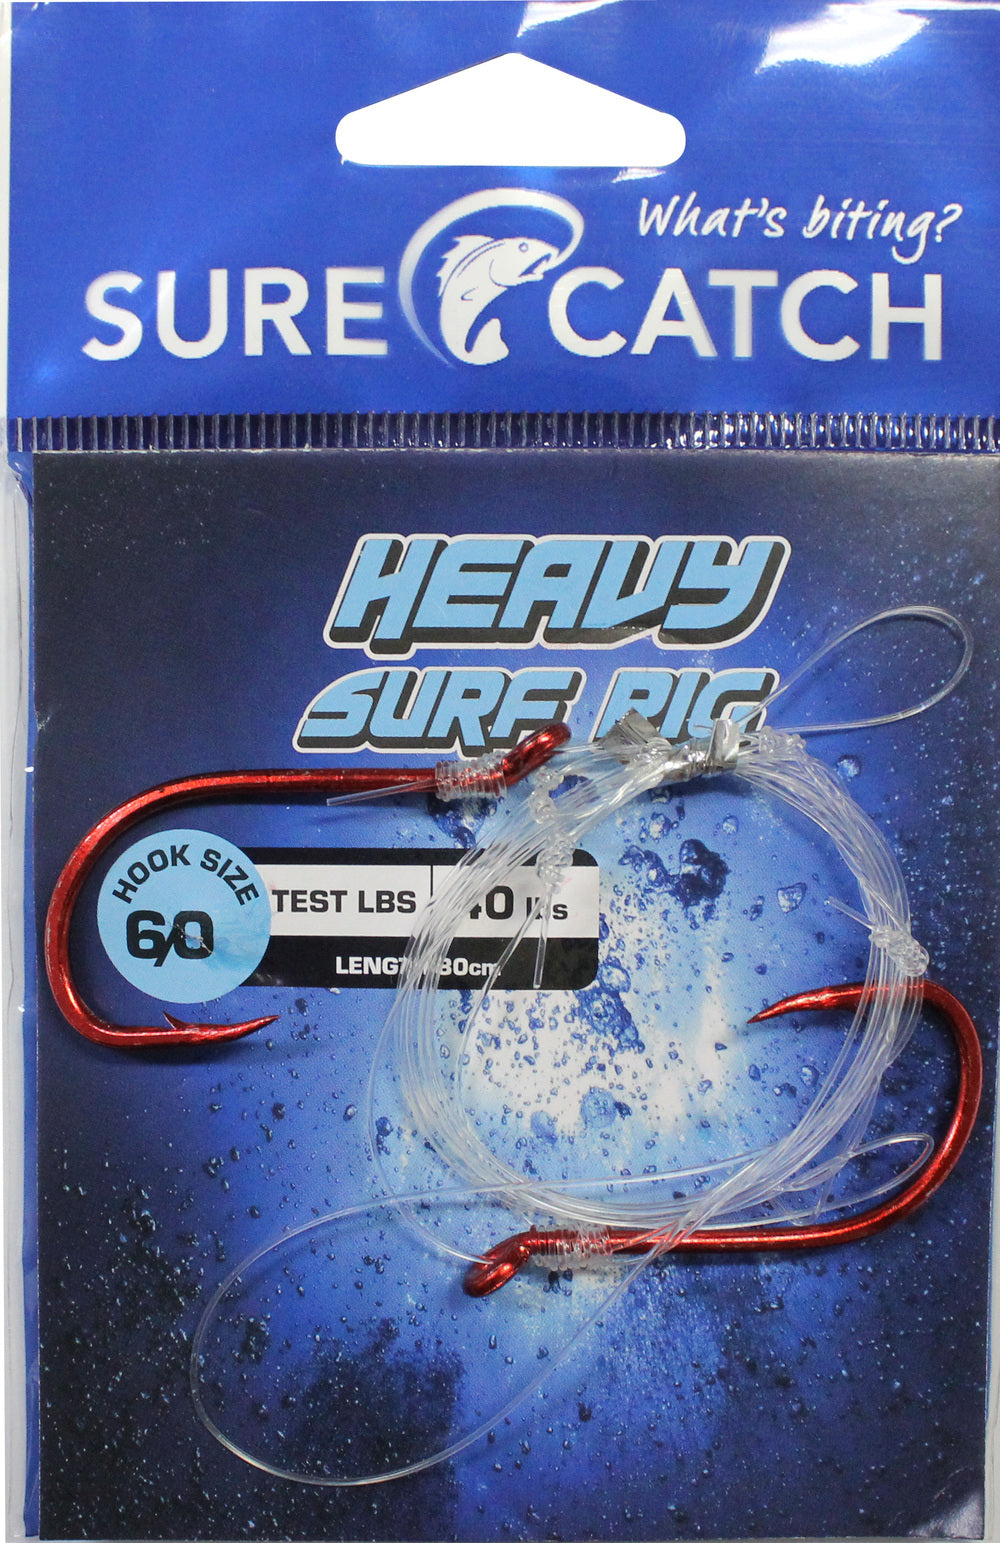 Sure Catch Pre-Tied Southern Heavy Surf Fishing Rig